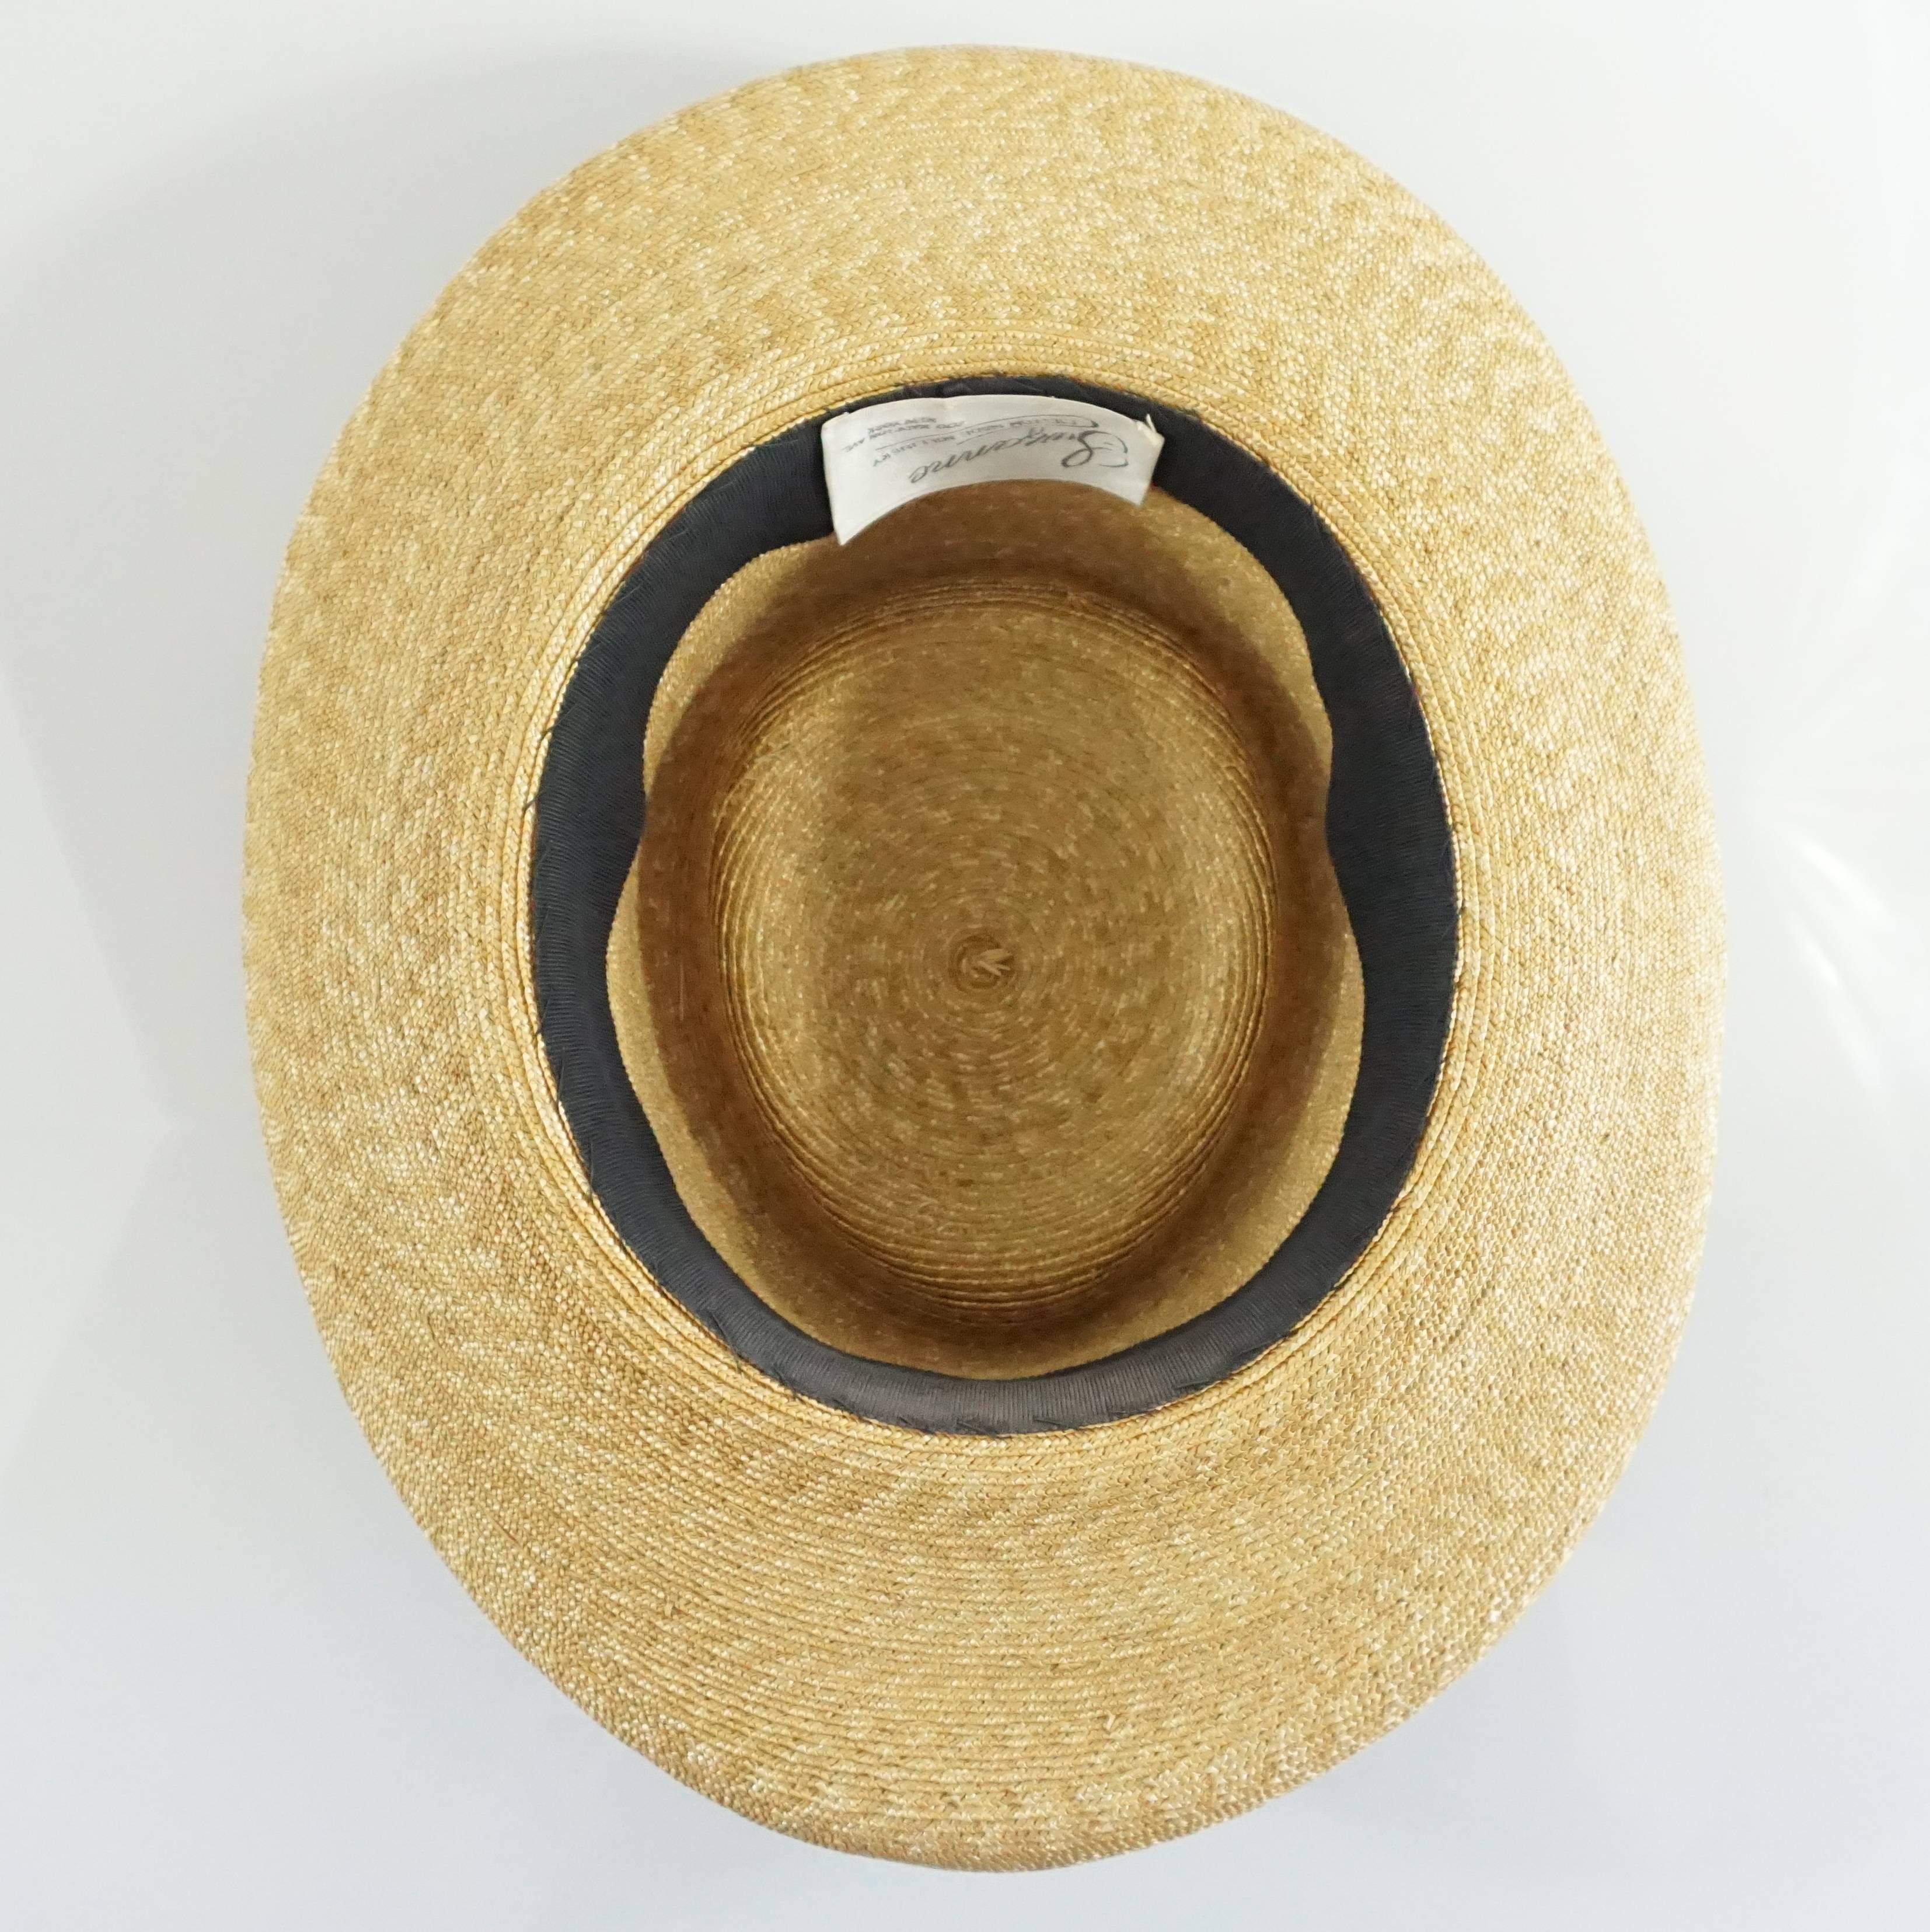 Women's Suzanne Couture Millinery Beige with Black Straw Hat